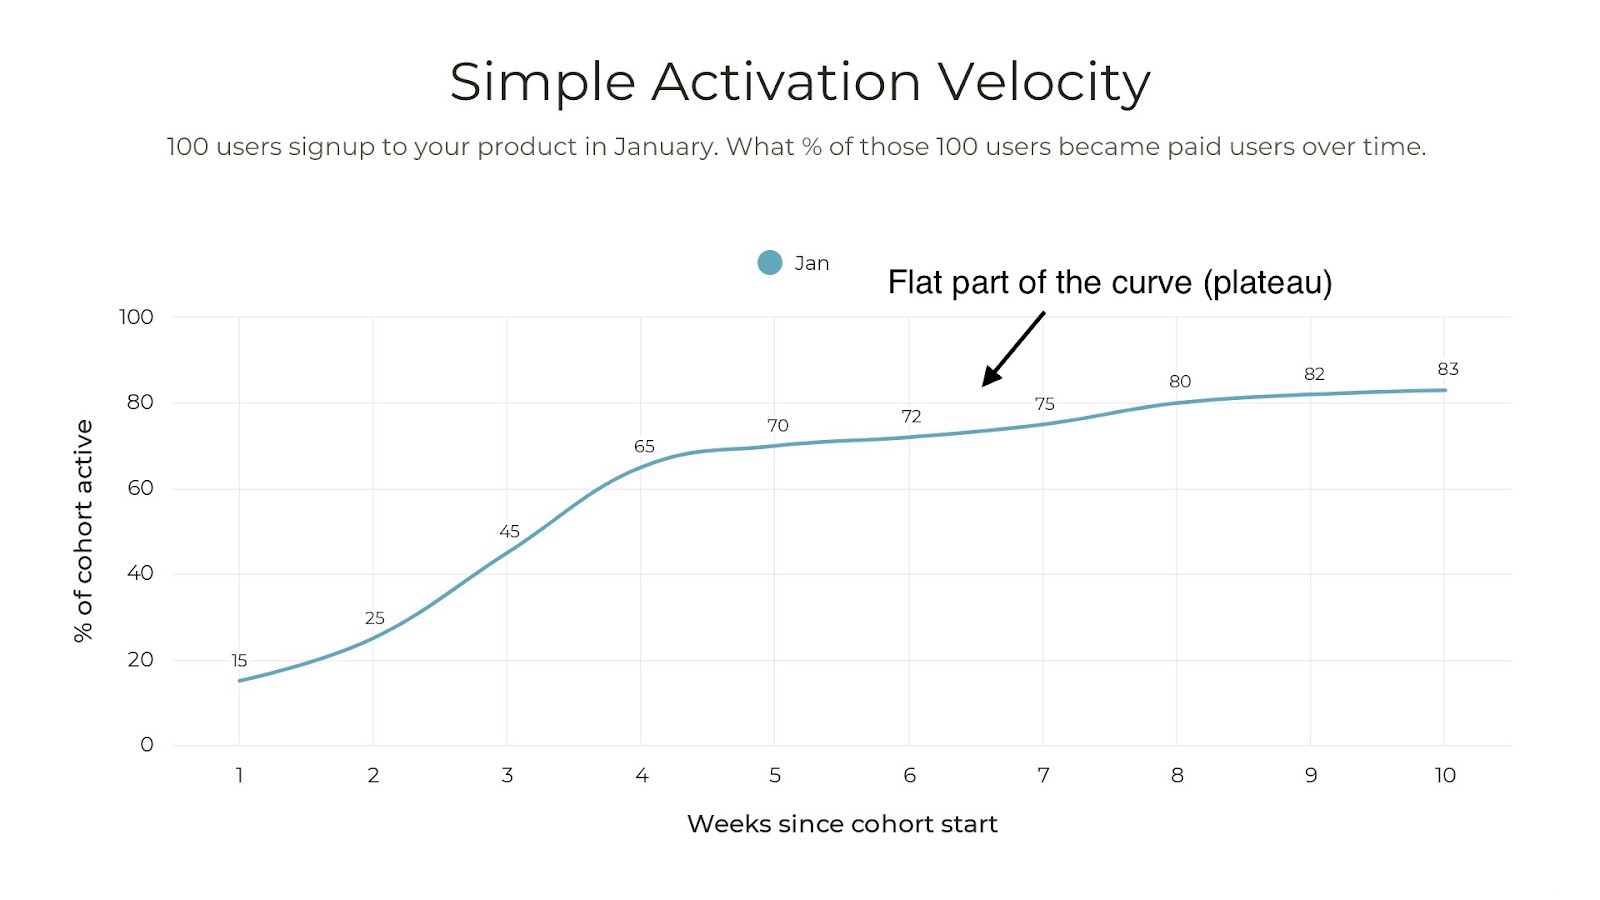 Simple Activation Velocity pointing at the flat part of the curve